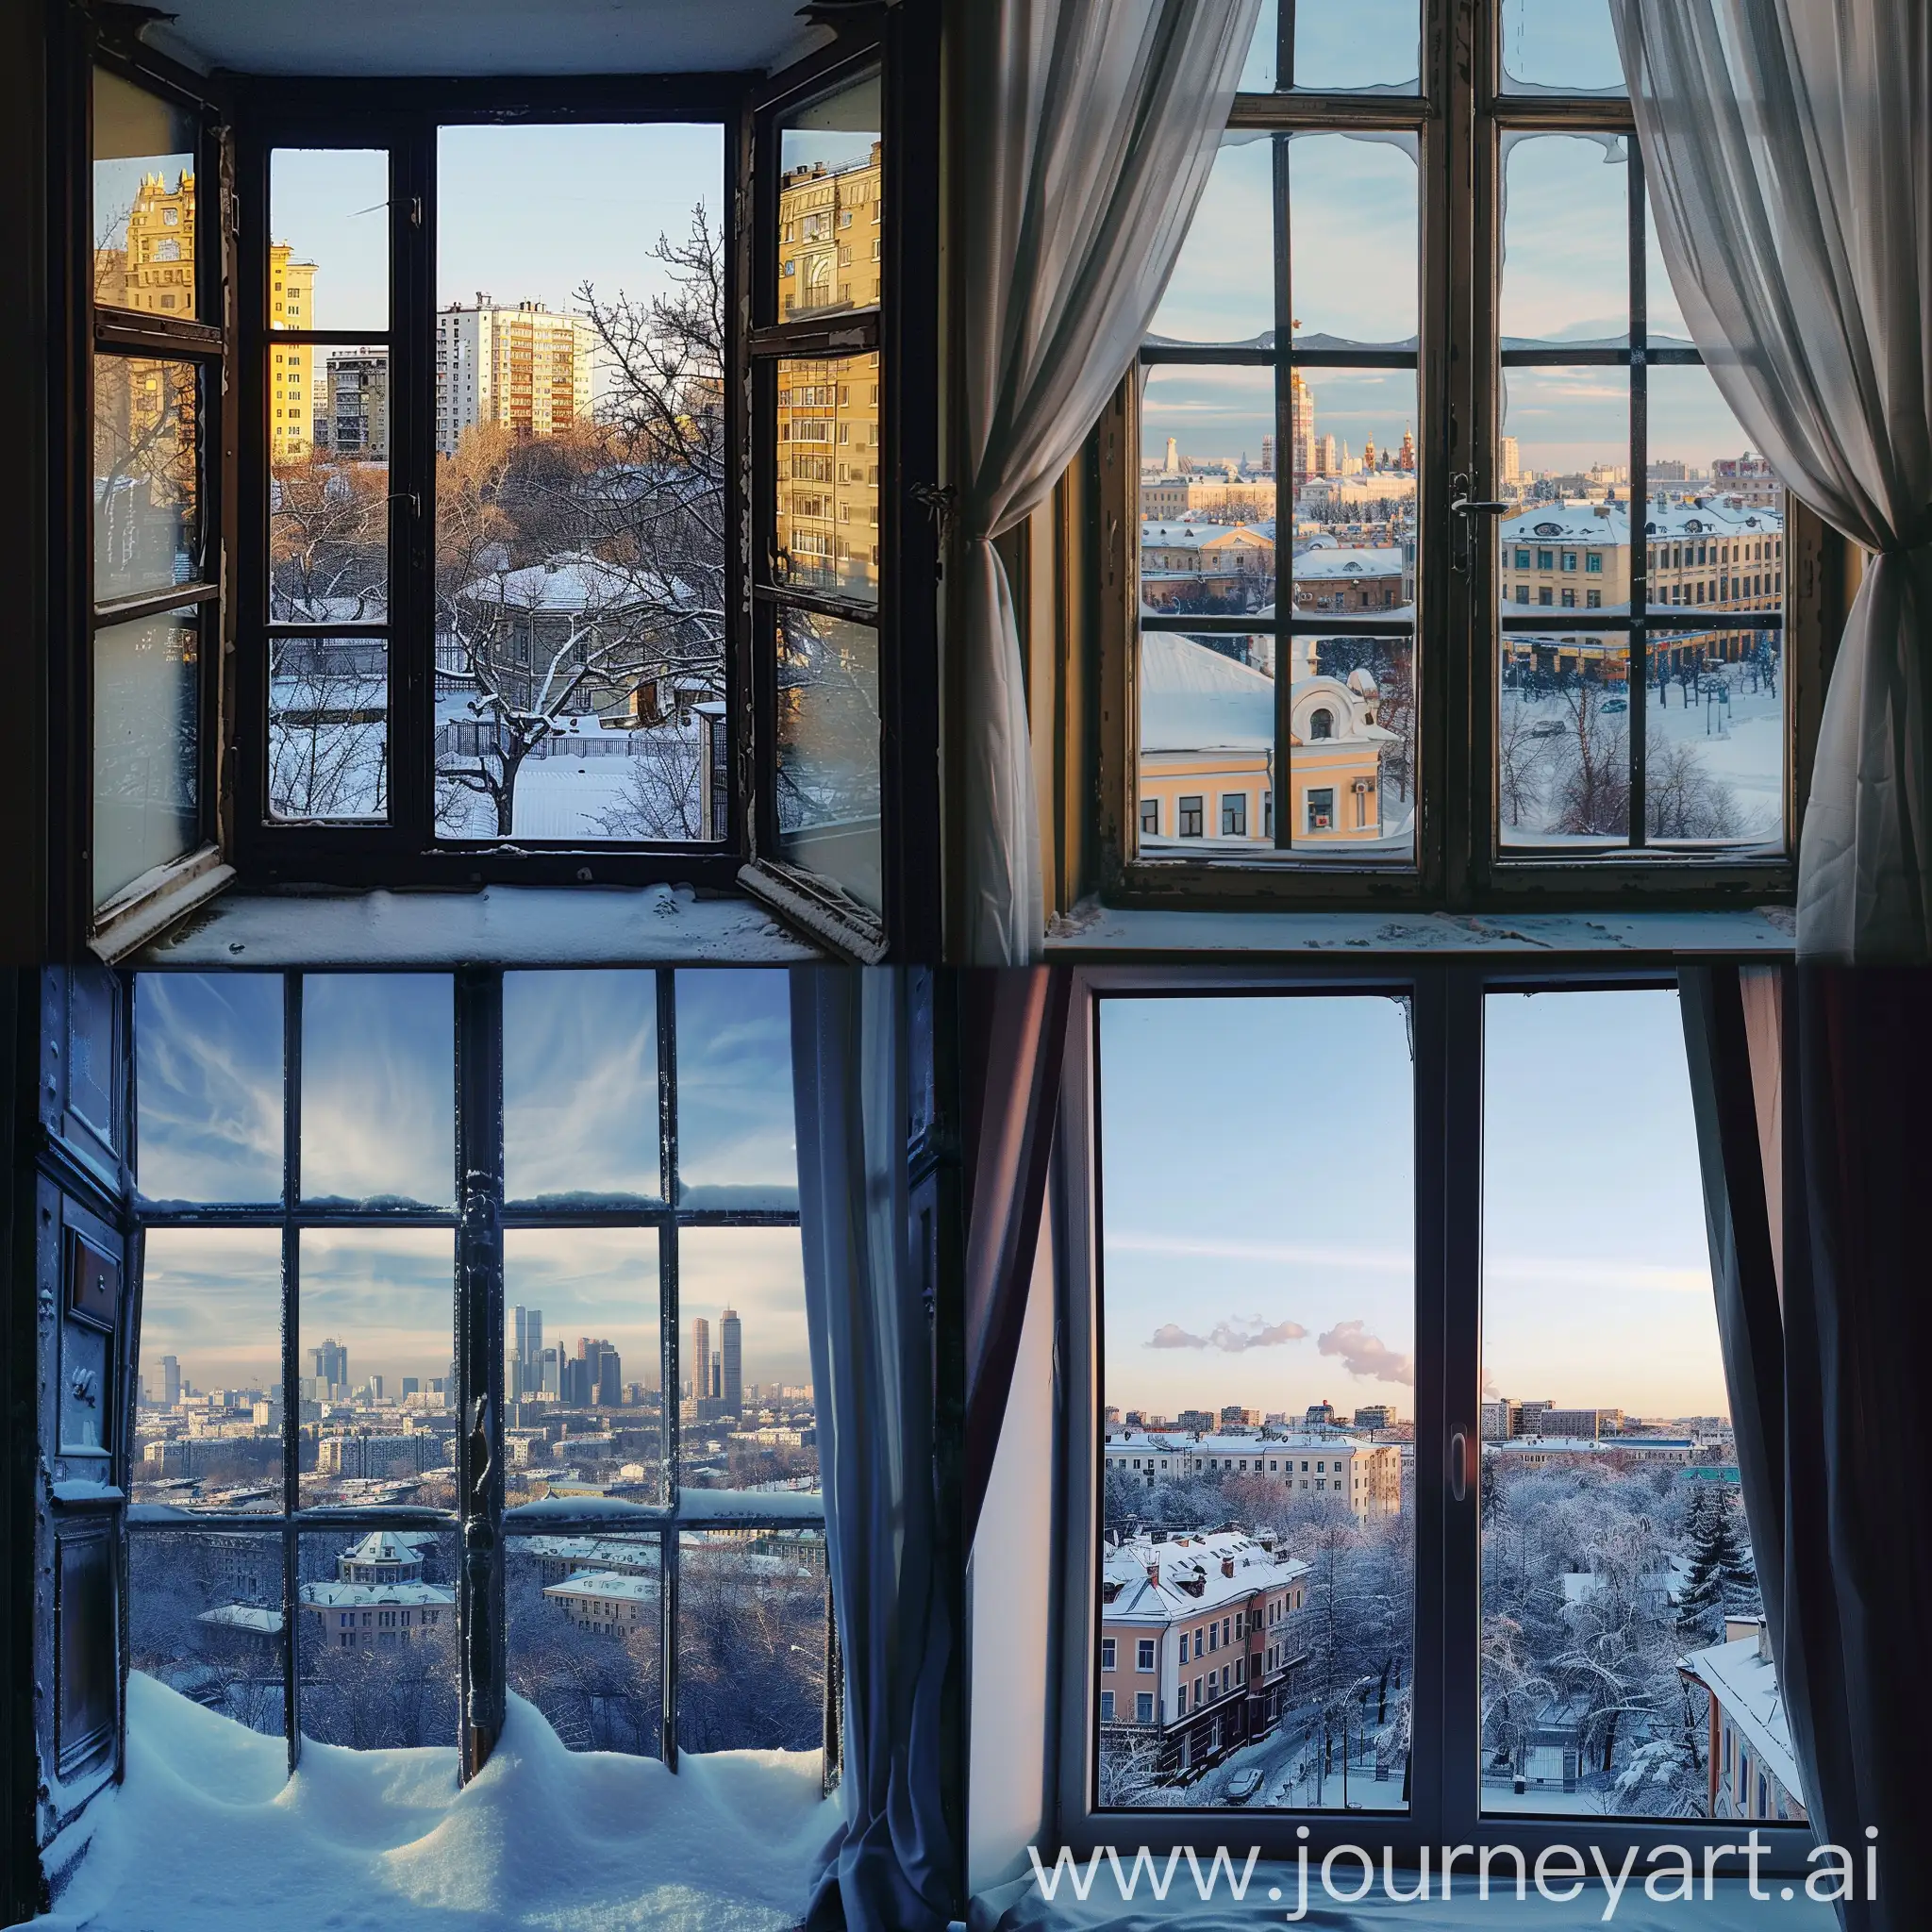 view from the window on the winter city